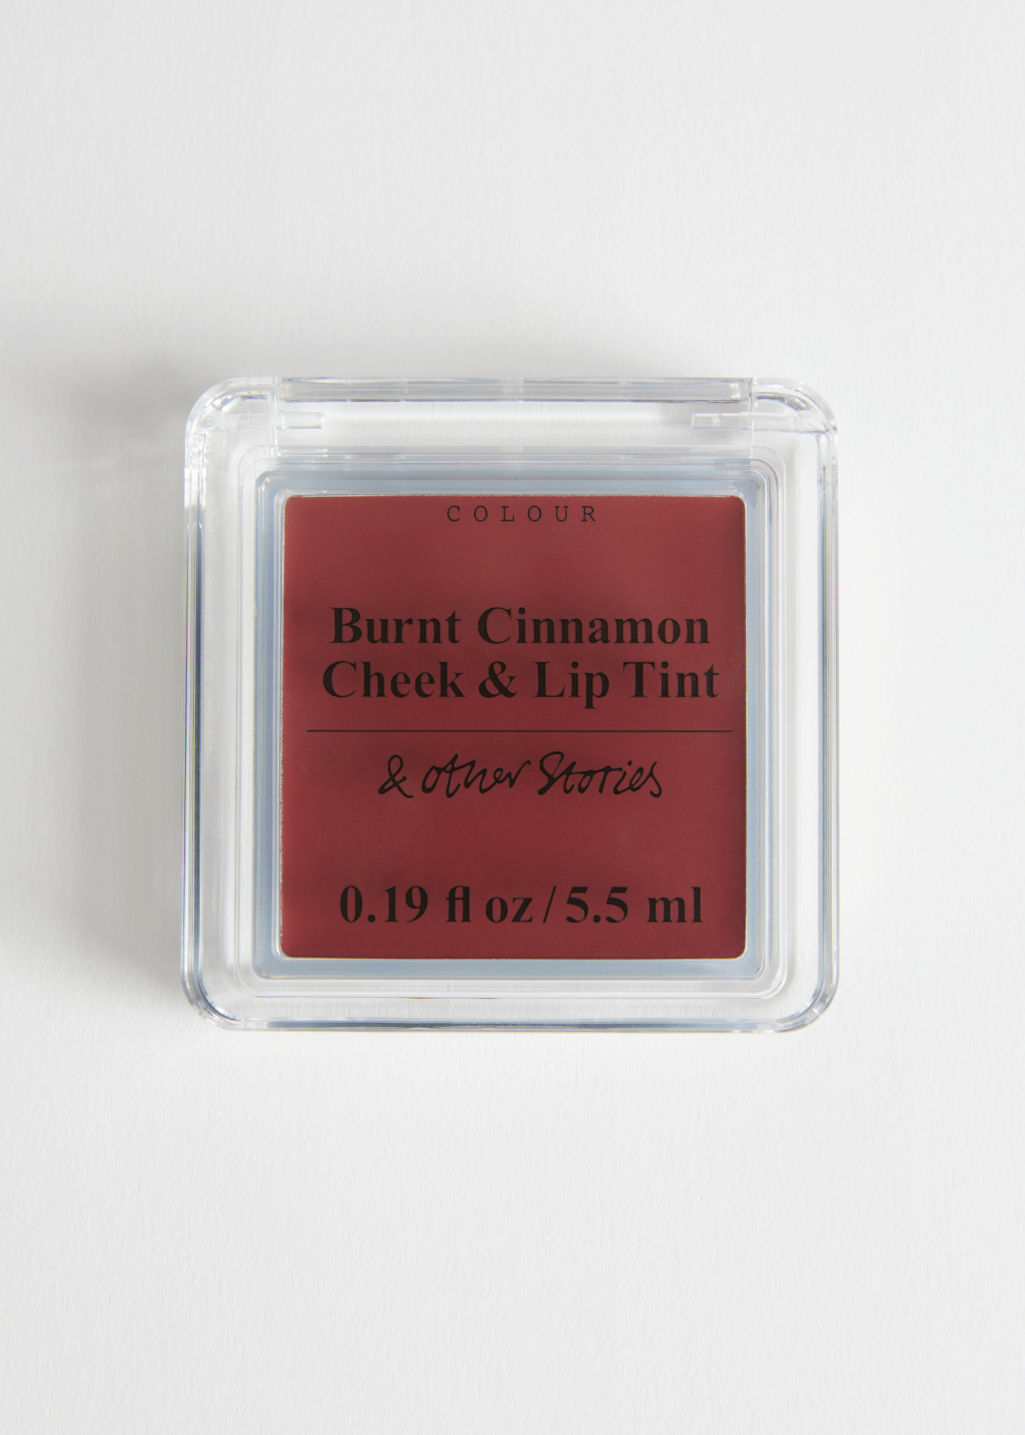 & Other Stories Burnt Cinnamon Cheek and Lip Tint